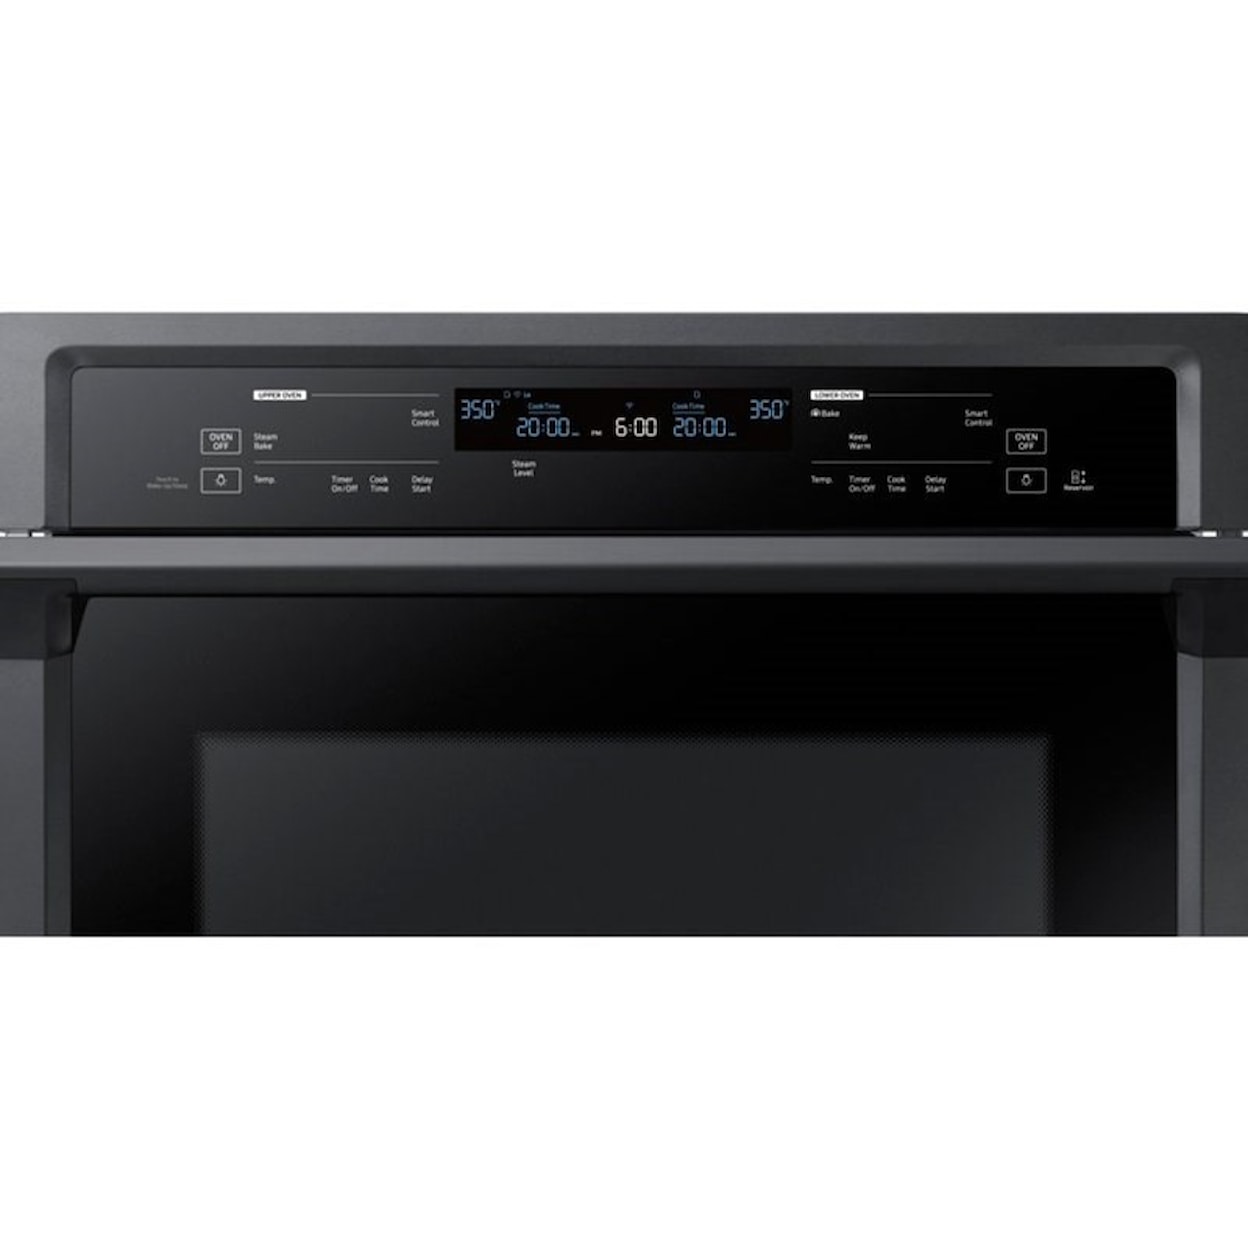 Samsung Appliances Double Wall Ovens - Samsung 30" Double Wall Oven